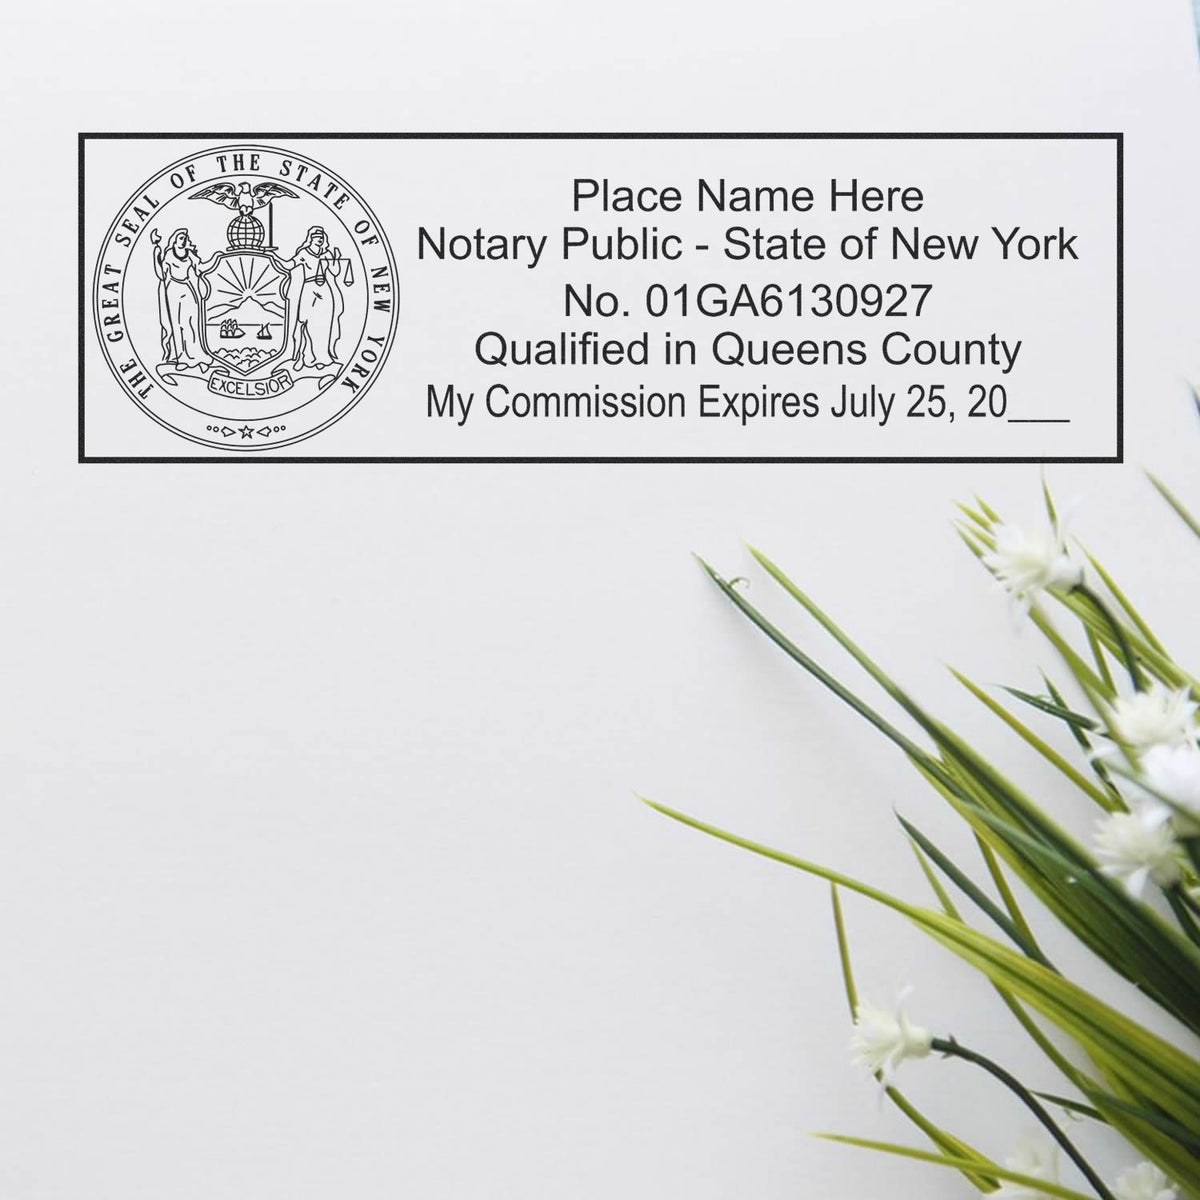 A photograph of the MaxLight Premium Pre-Inked New York State Seal Notarial Stamp stamp impression reveals a vivid, professional image of the on paper.